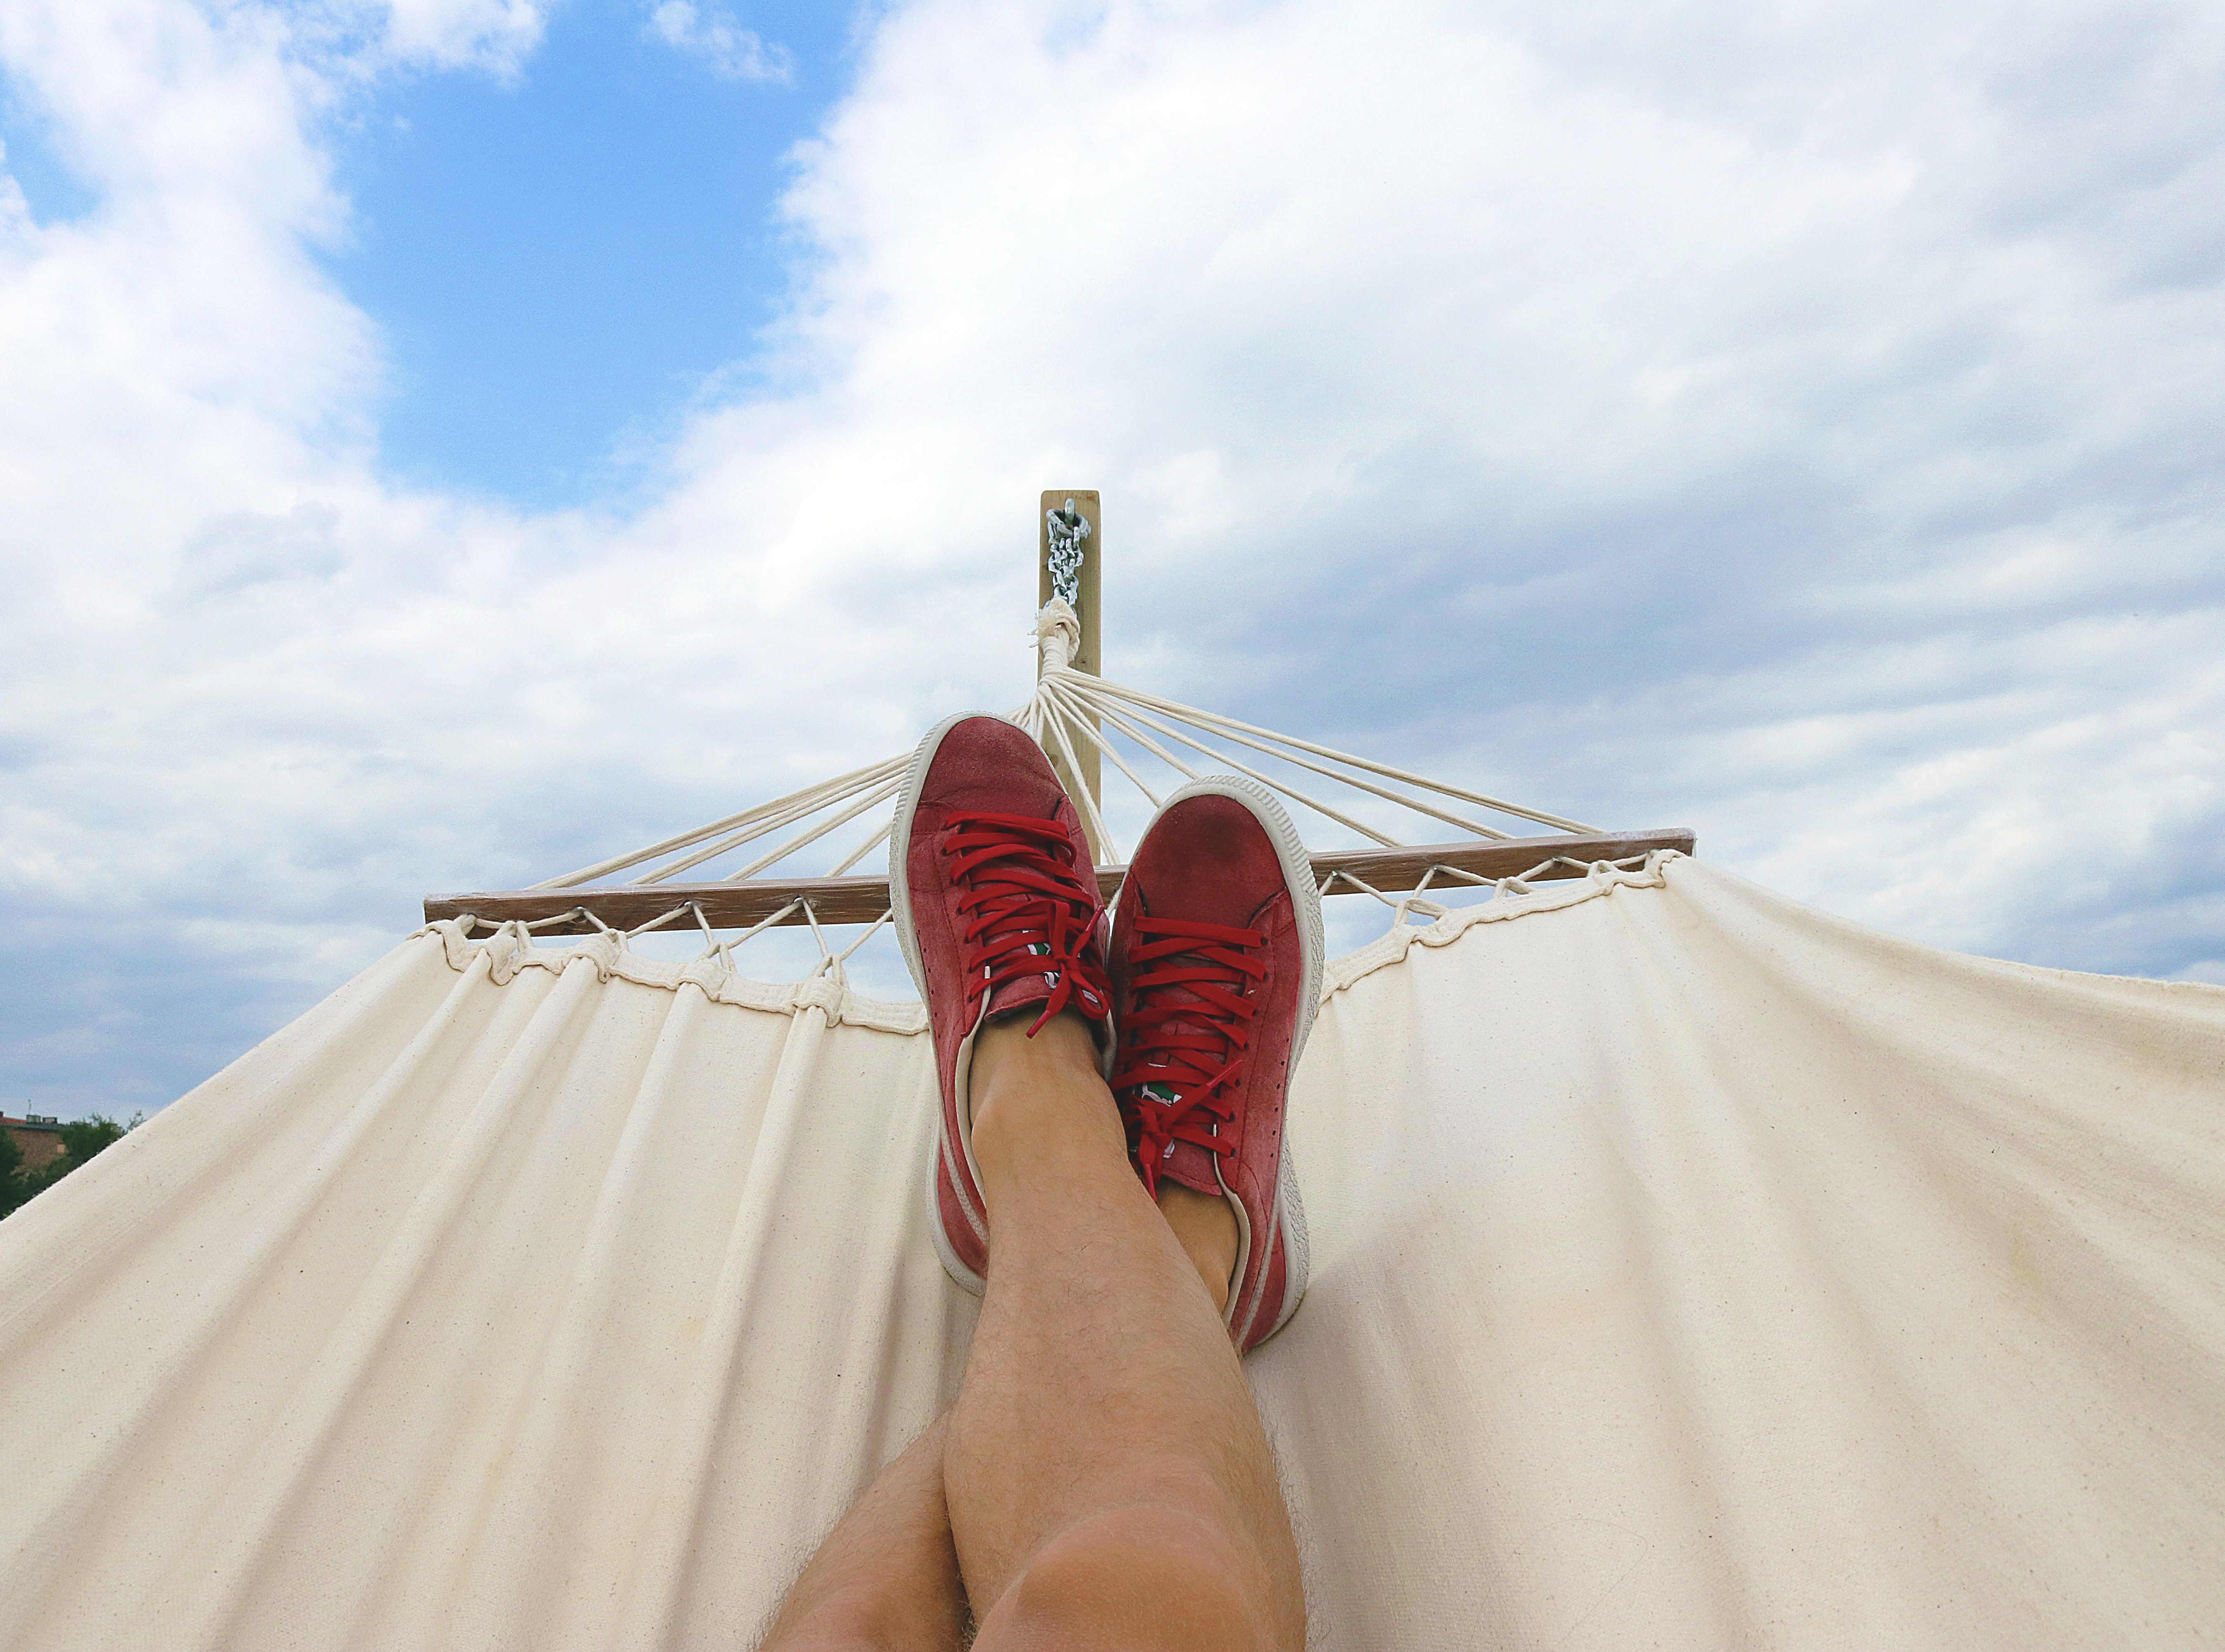 A person relaxing on a hammock